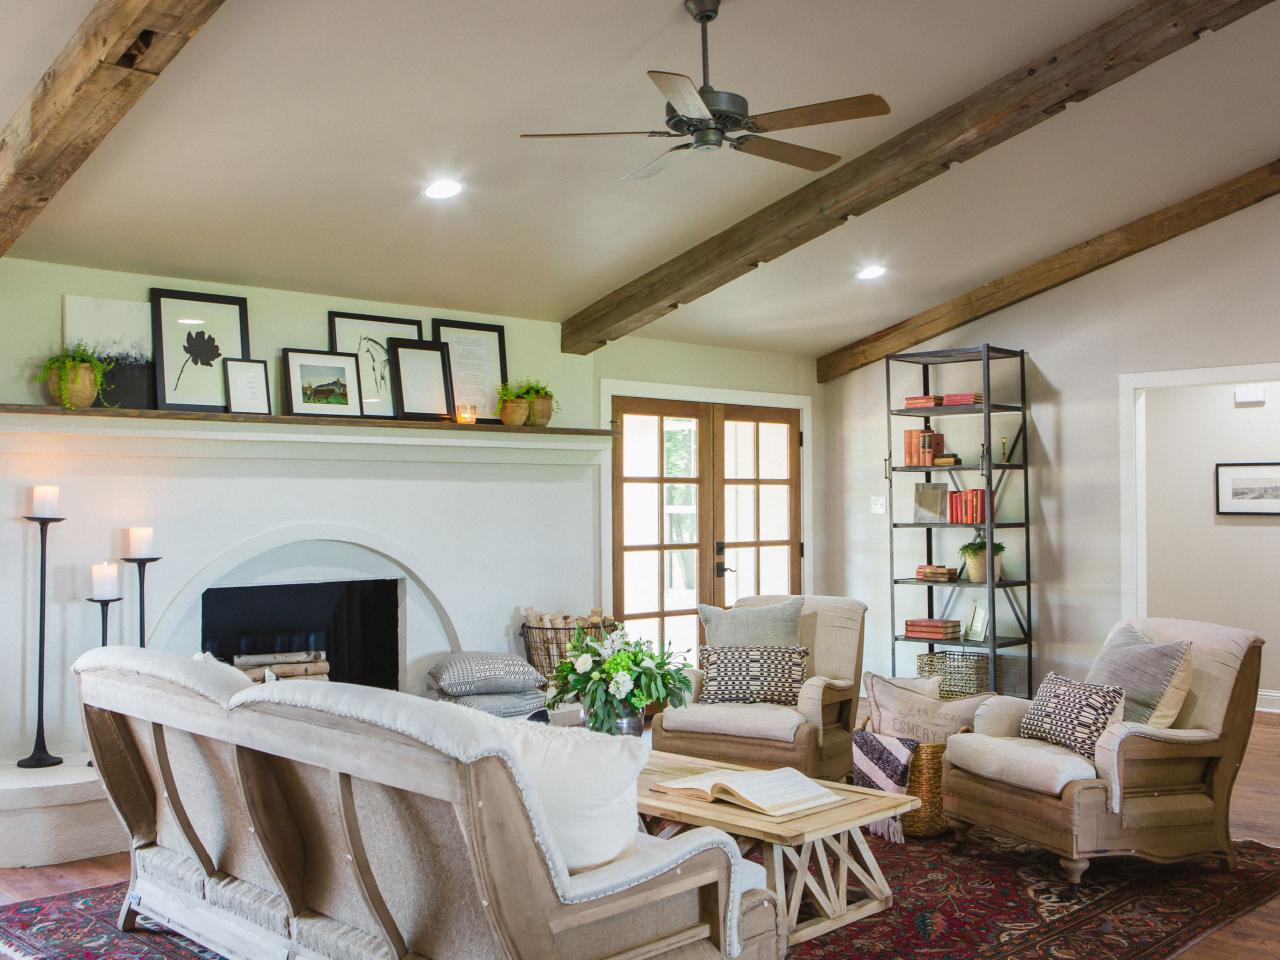 Living room fireplace that stretches along one wall with mantel adorned with picture frames and potted plants.